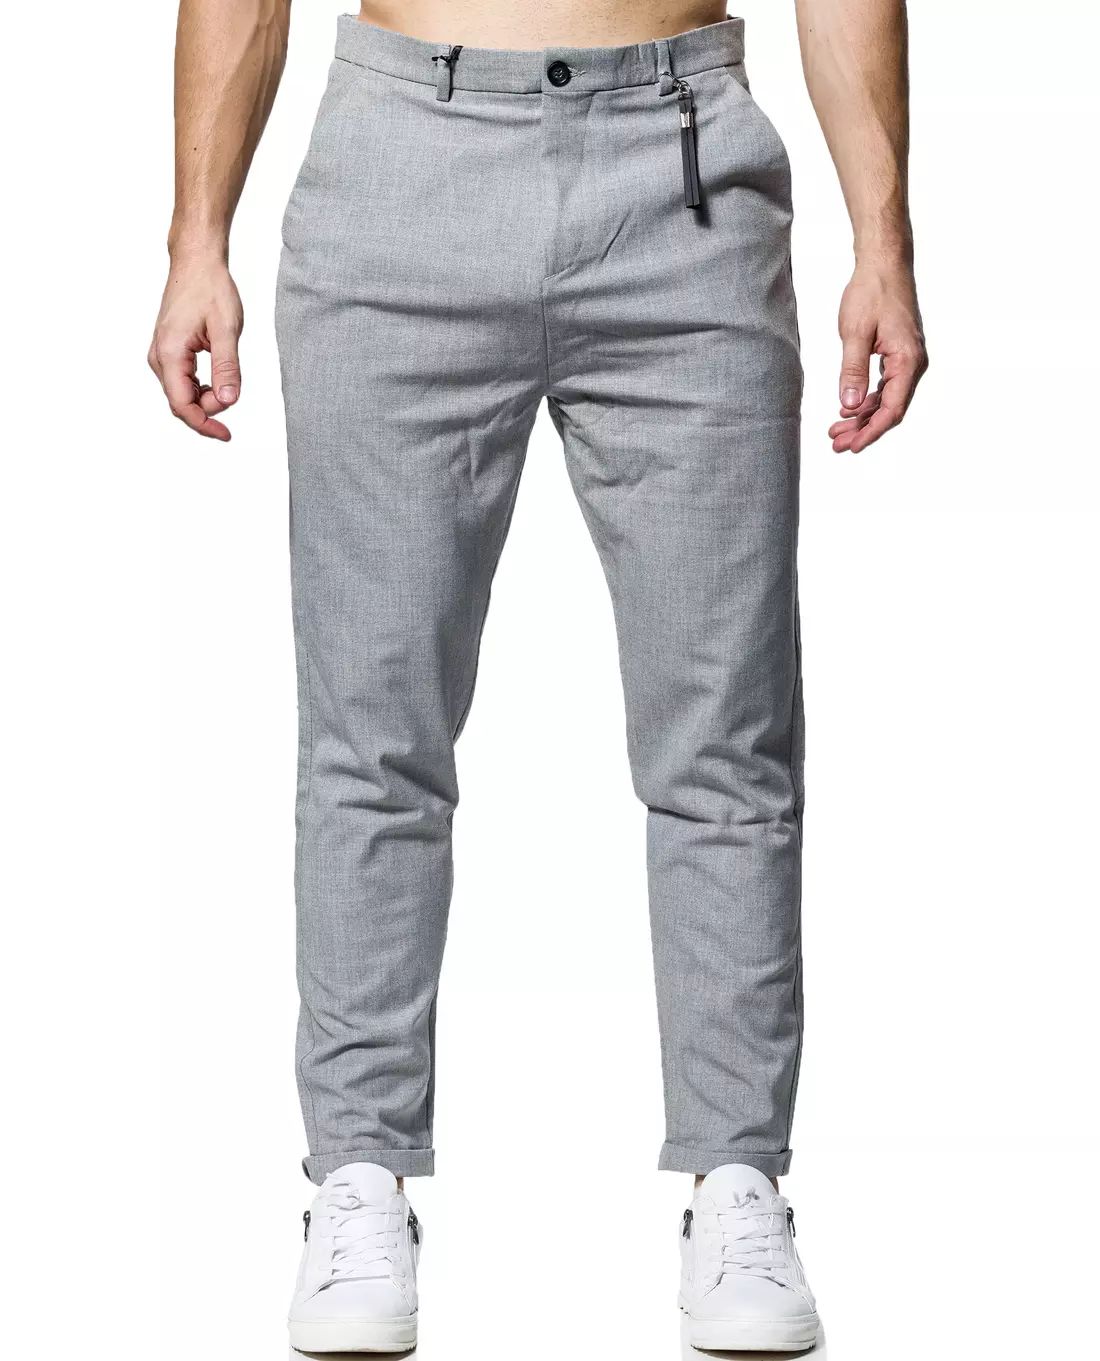 Grisciano Pants Jerone